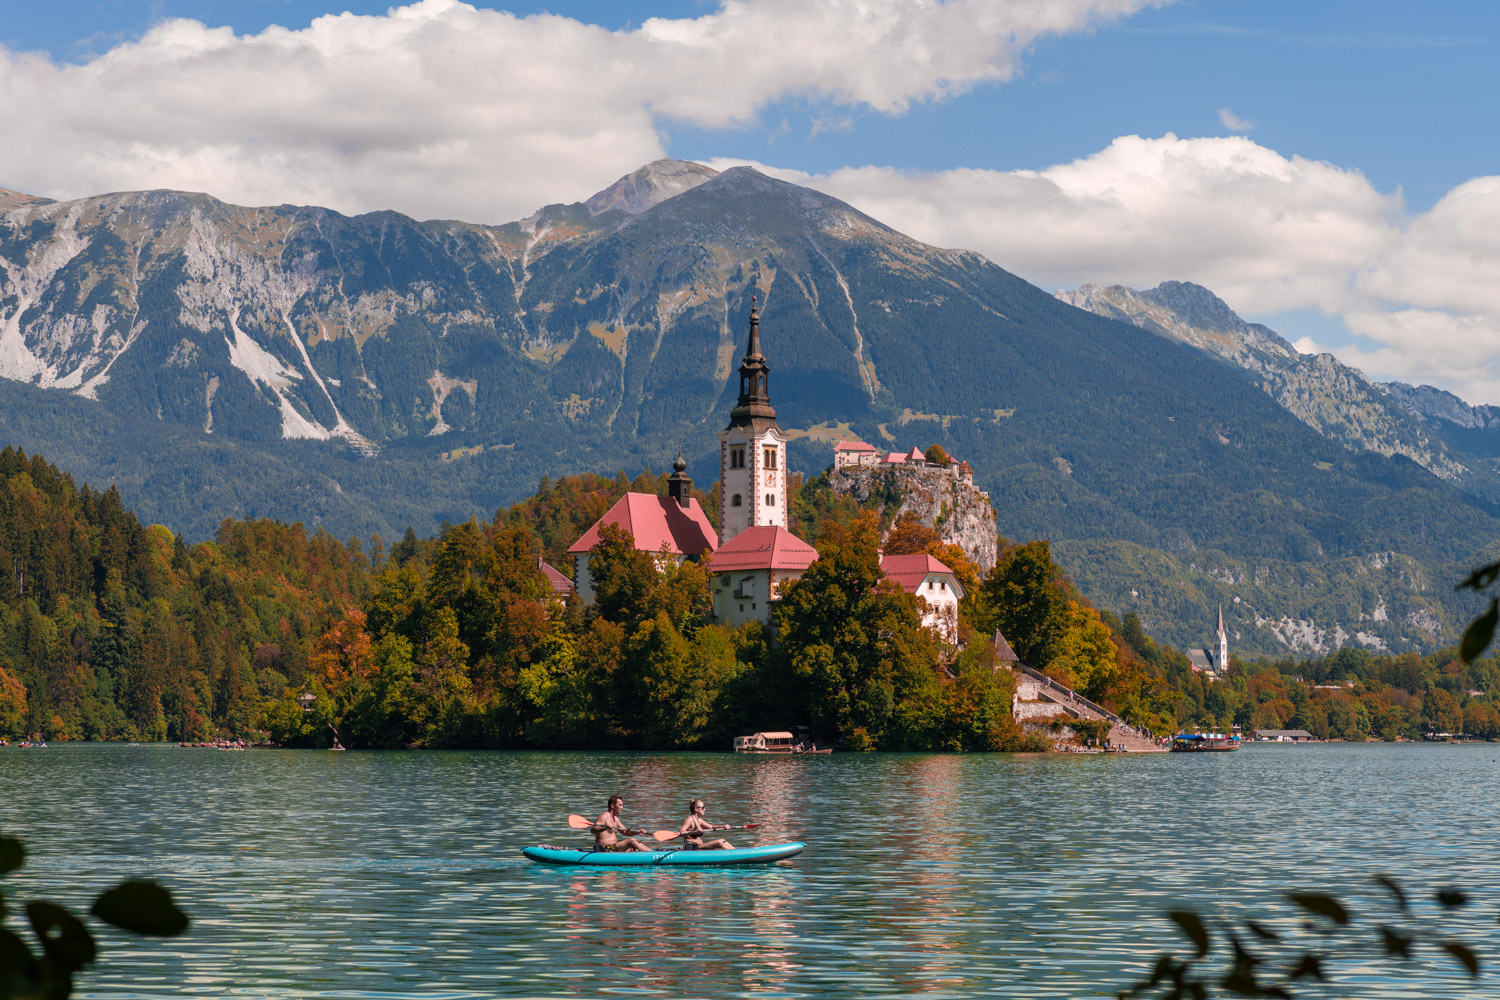 Postcard from Bled (Slovenia)...